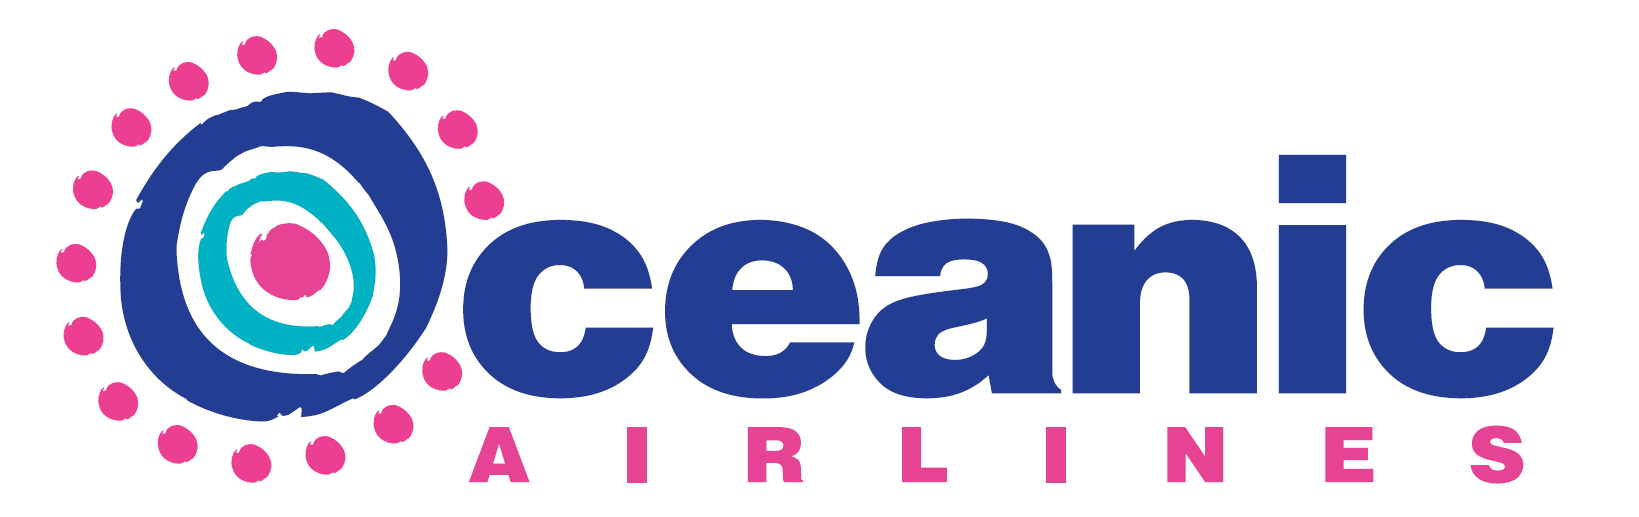 The Oceanic Airlines' logo